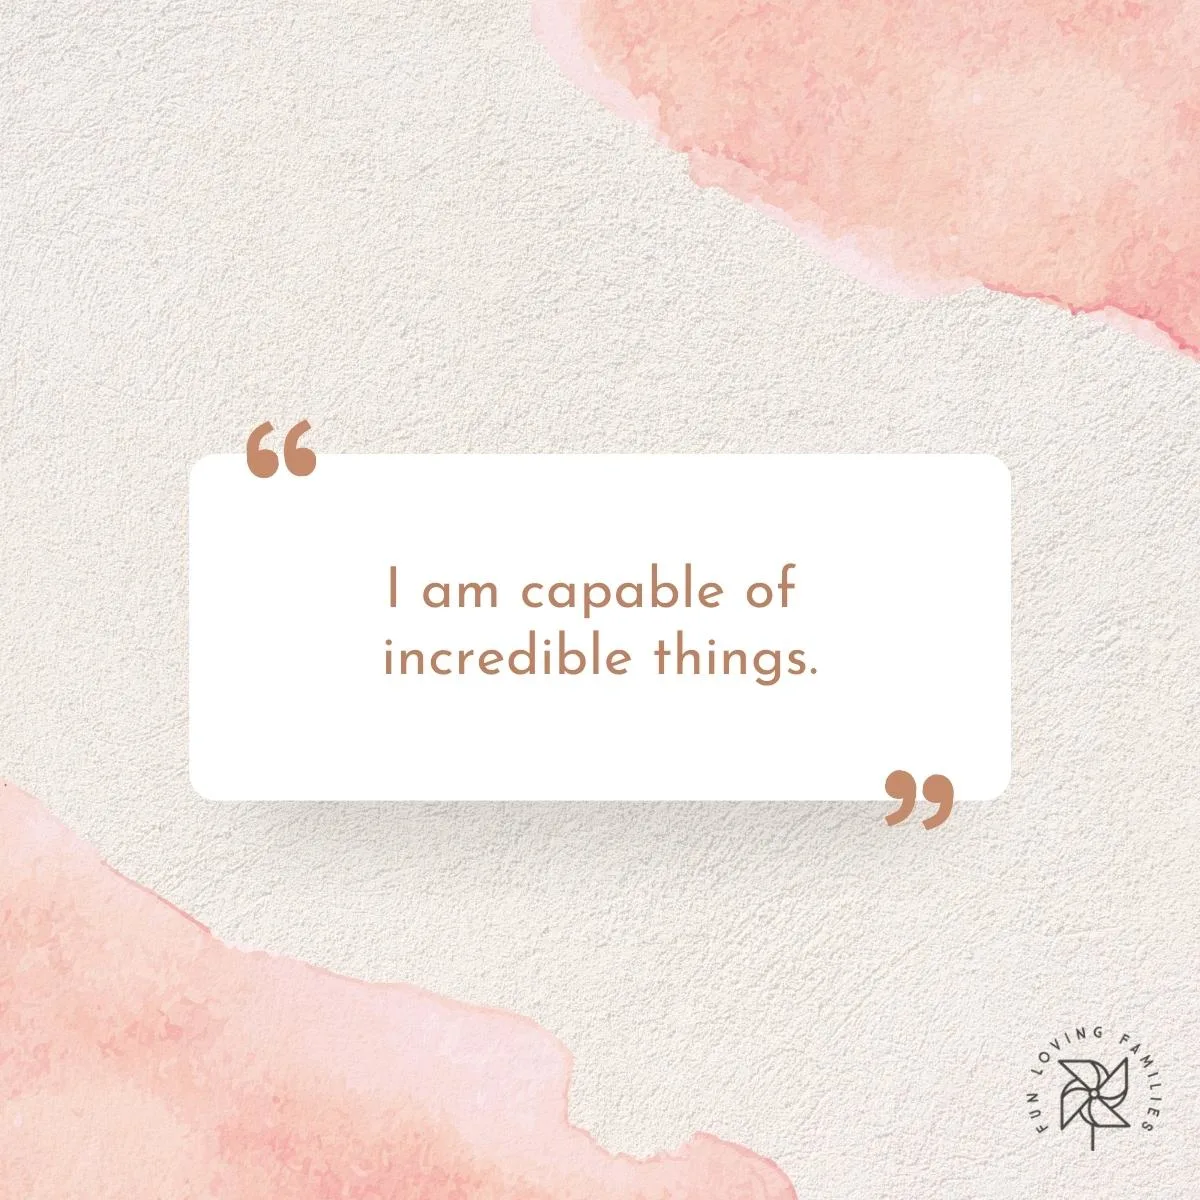 I am capable of incredible things affirmation